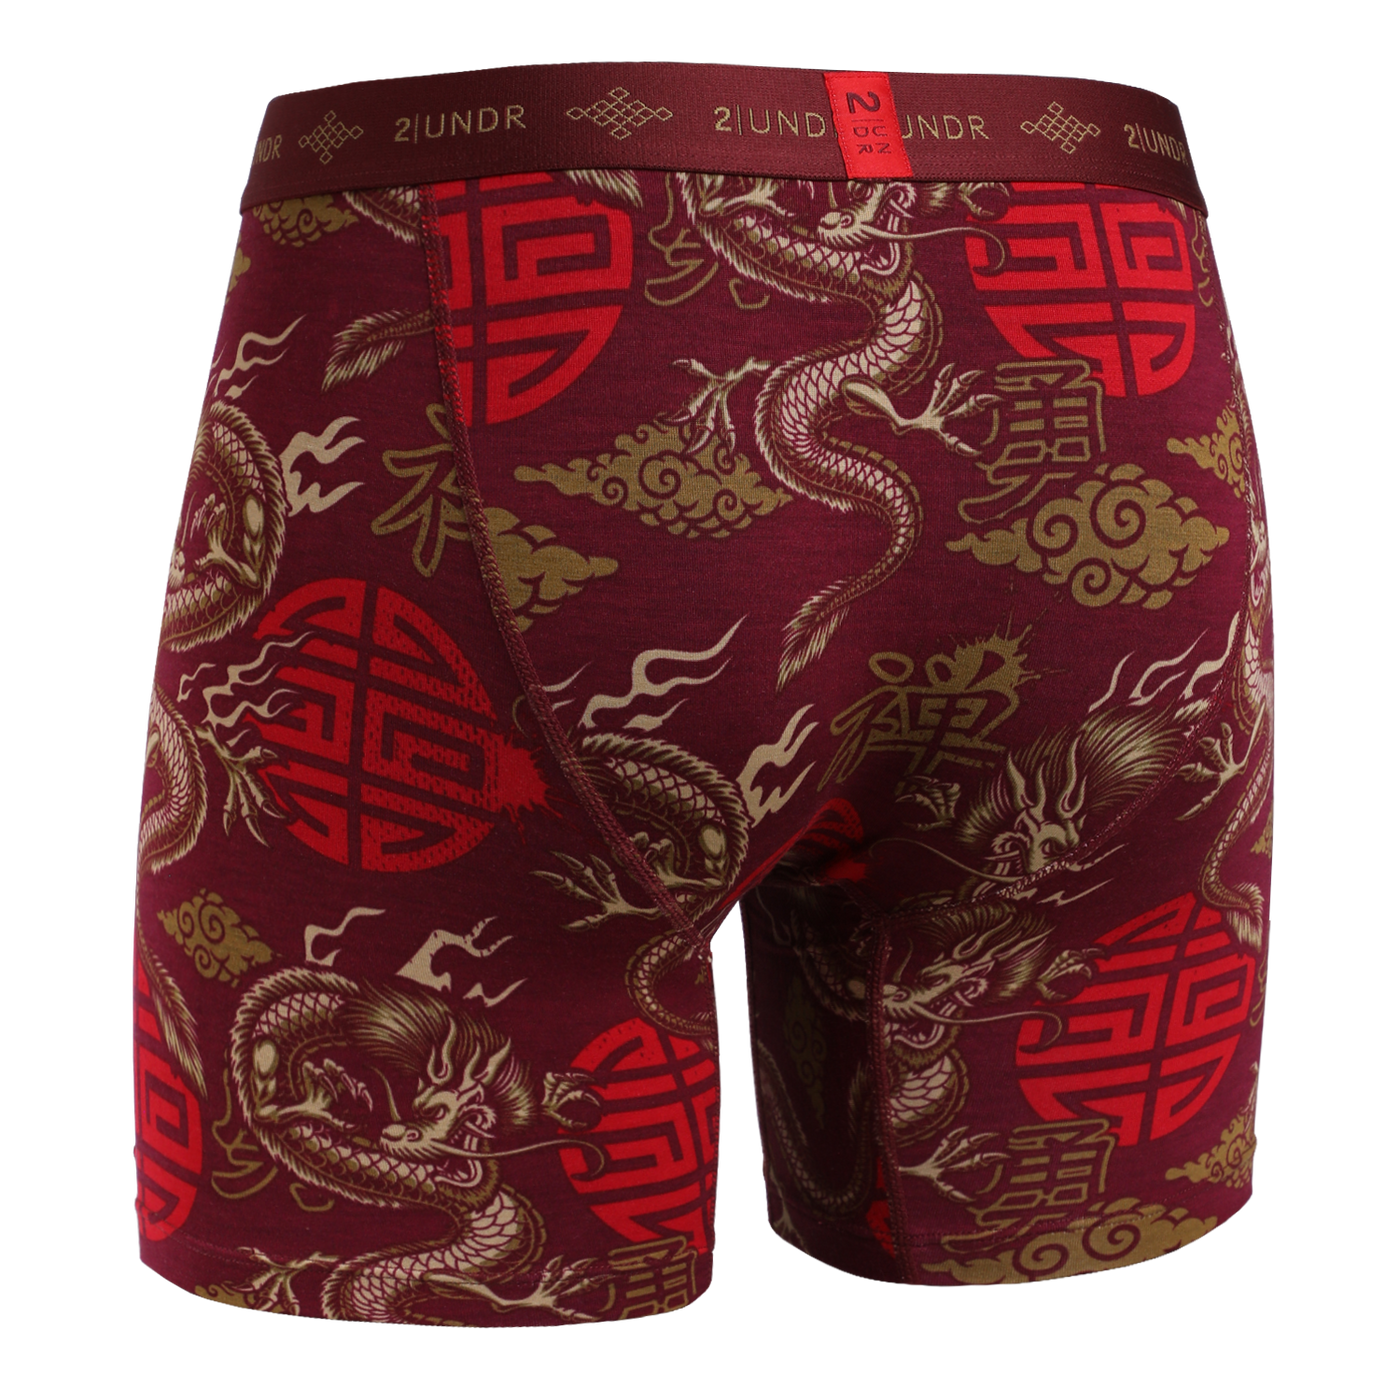 Swing Shift Boxer Brief - Year of the Dragon – 2UNDR